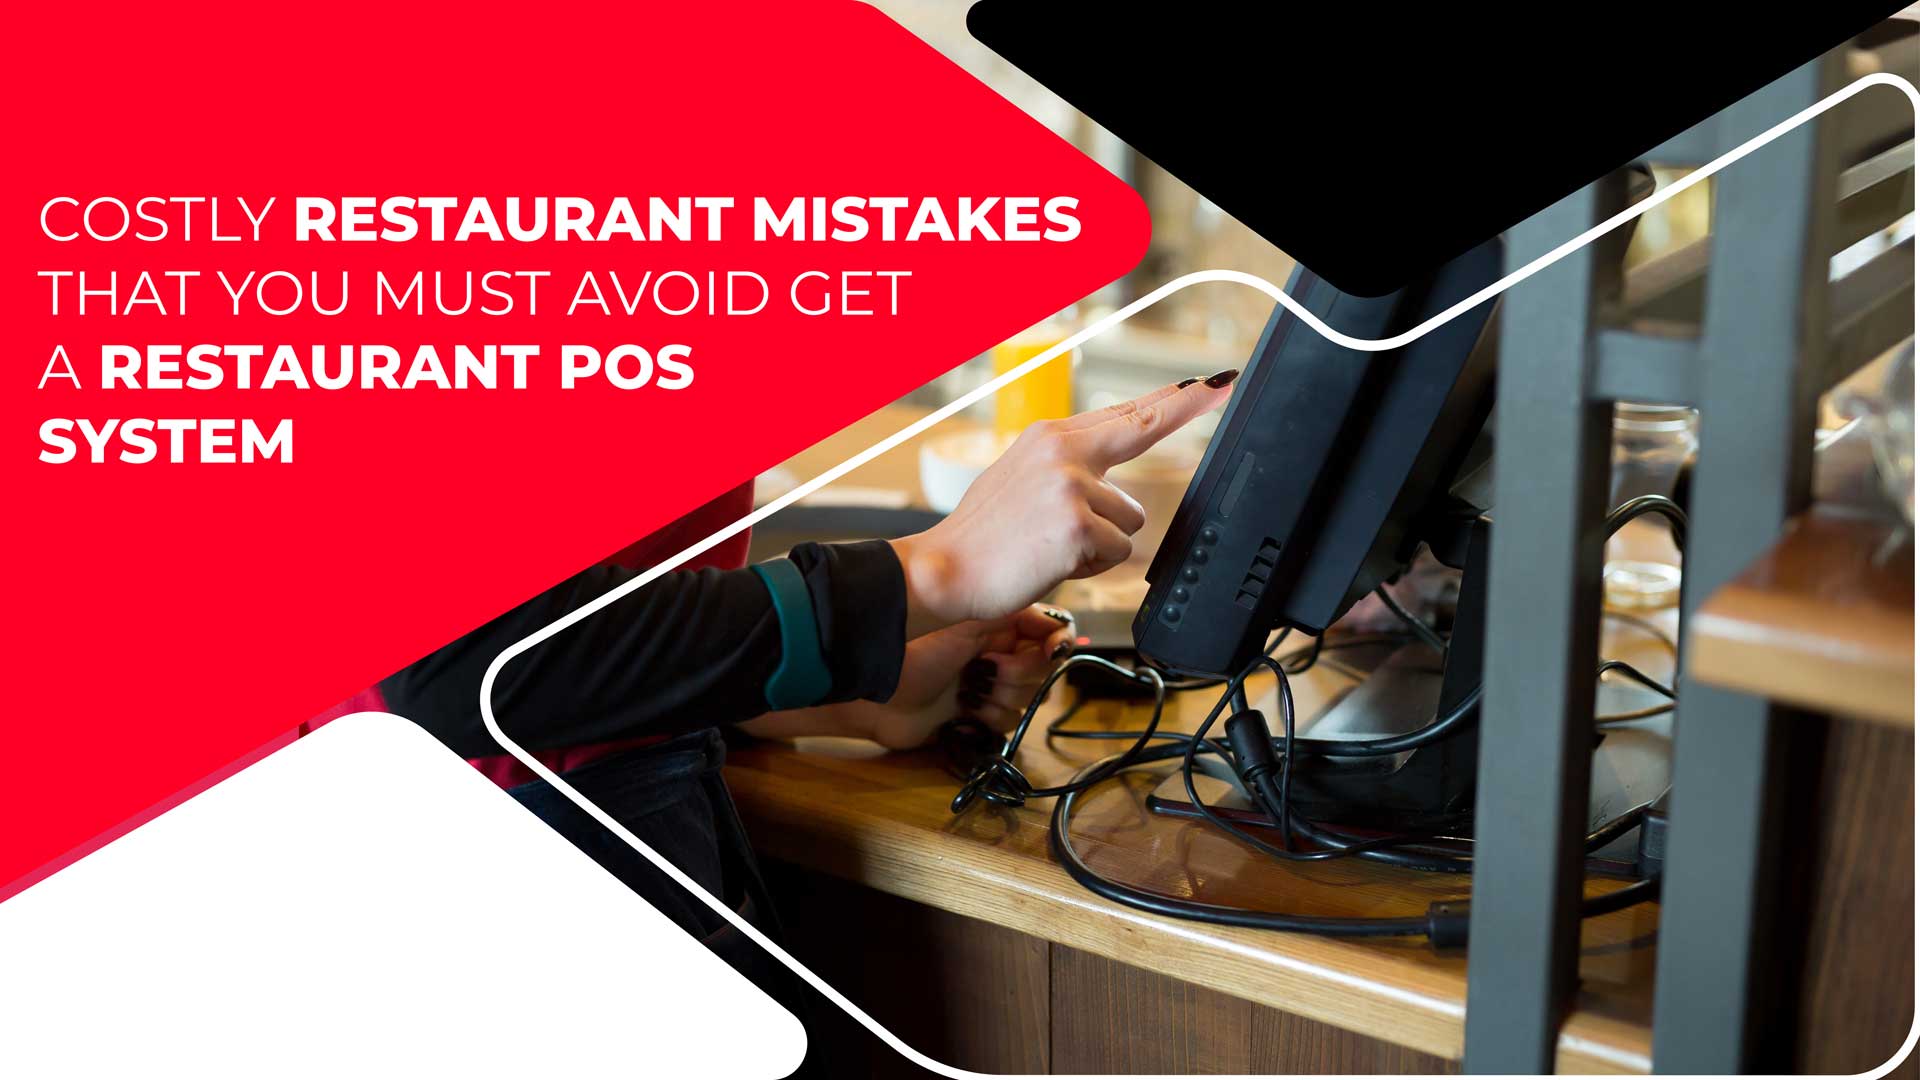 Costly Restaurant Mistakes that you must avoid Get a Restaurant POS System 